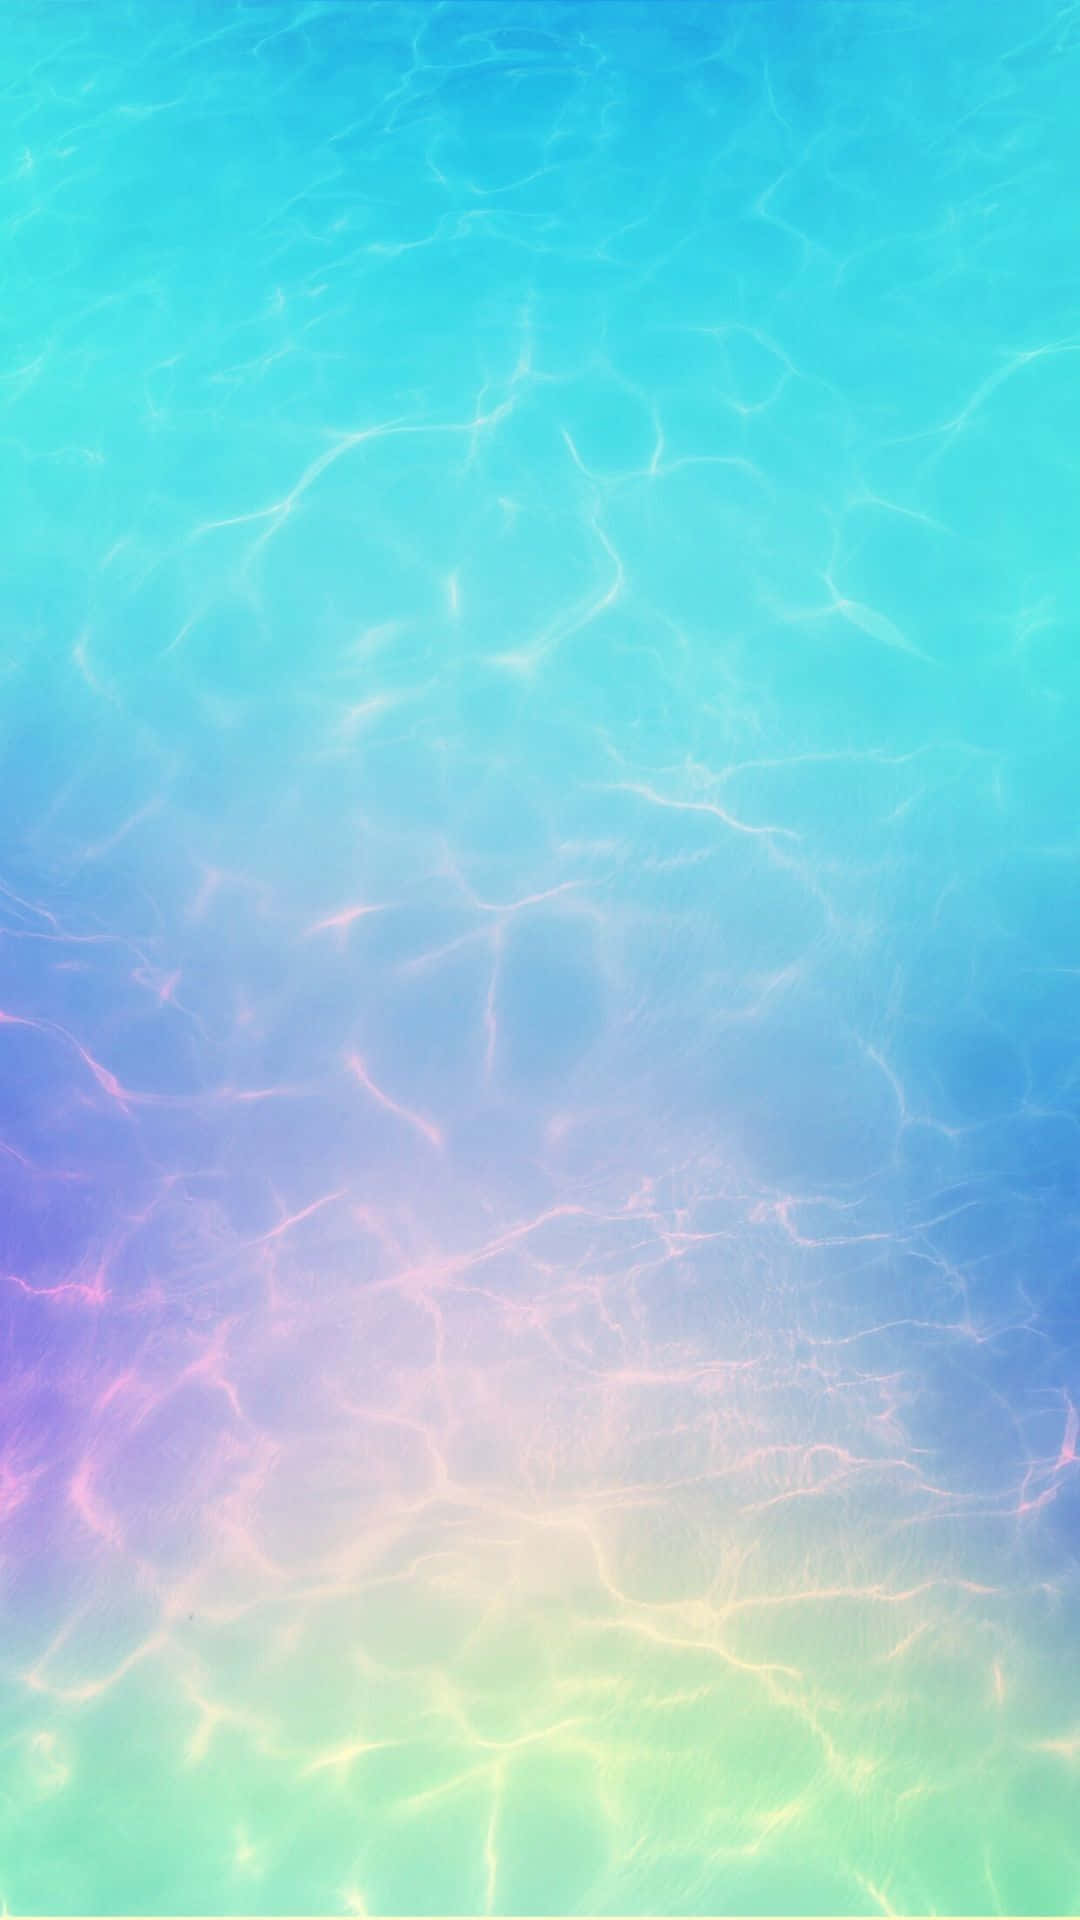 Get Style and Functionality with the Turquoise Iphone Wallpaper